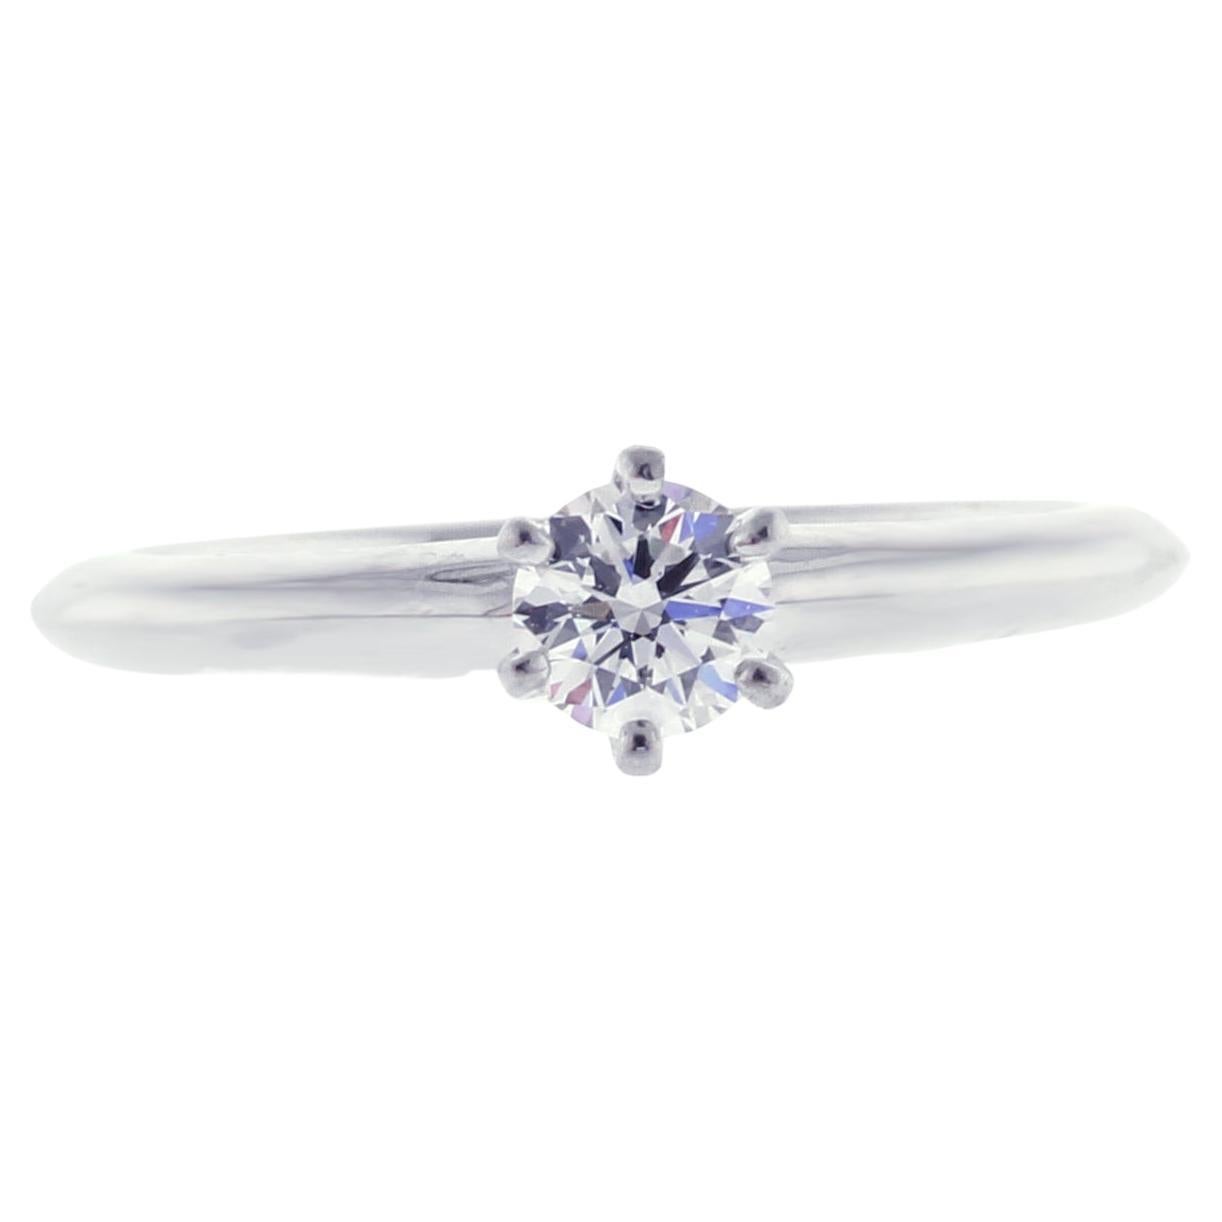 Tiffany & Co. Diamond Solitaire Engagement Ring